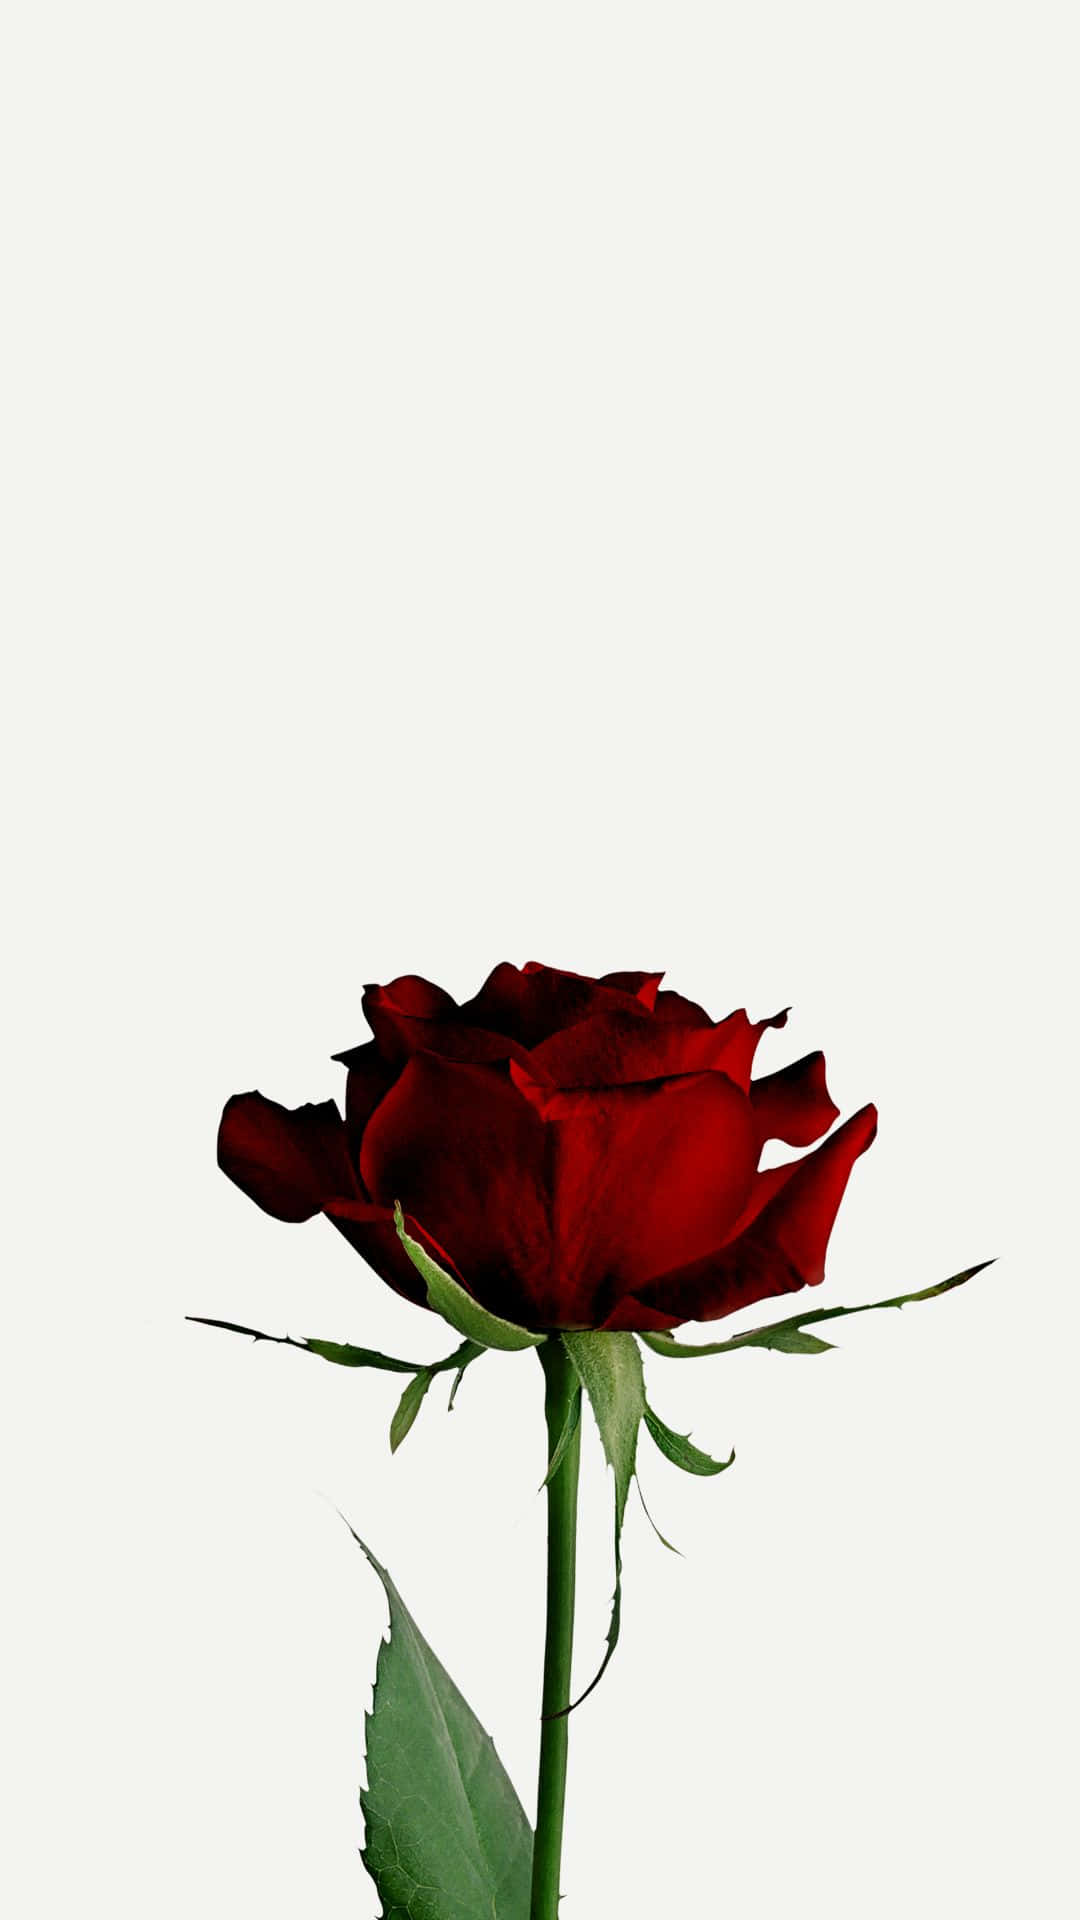 Hd Rose On White Background